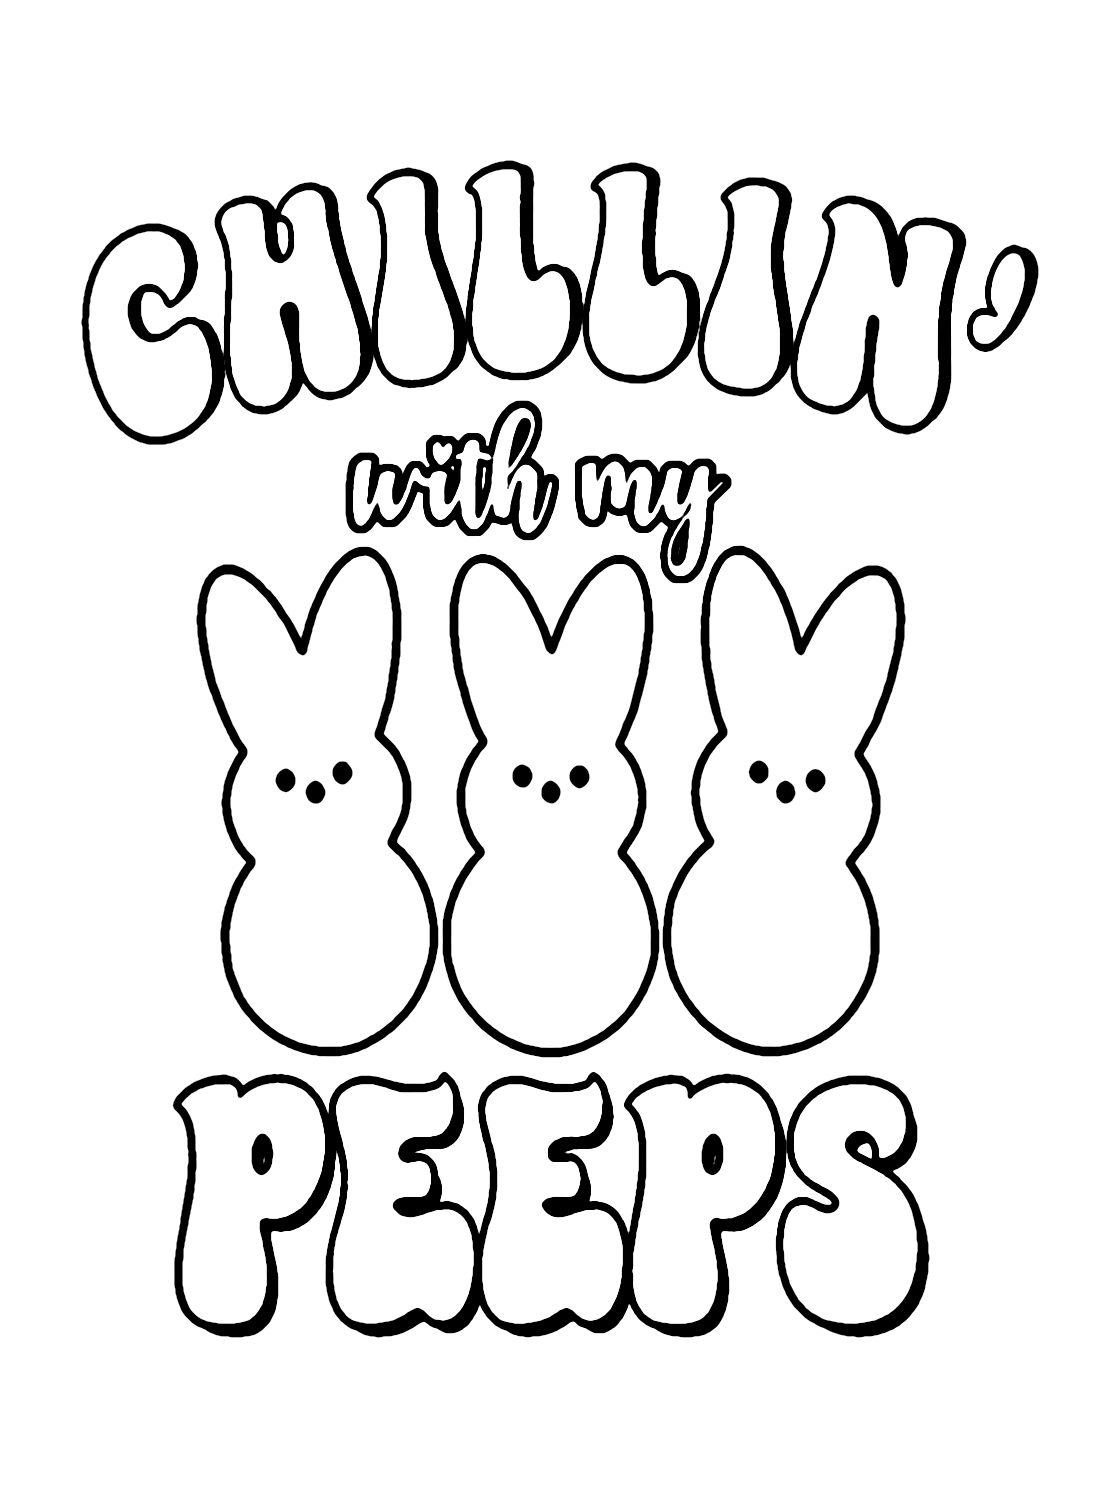 Chillin Peeps Coloring Page